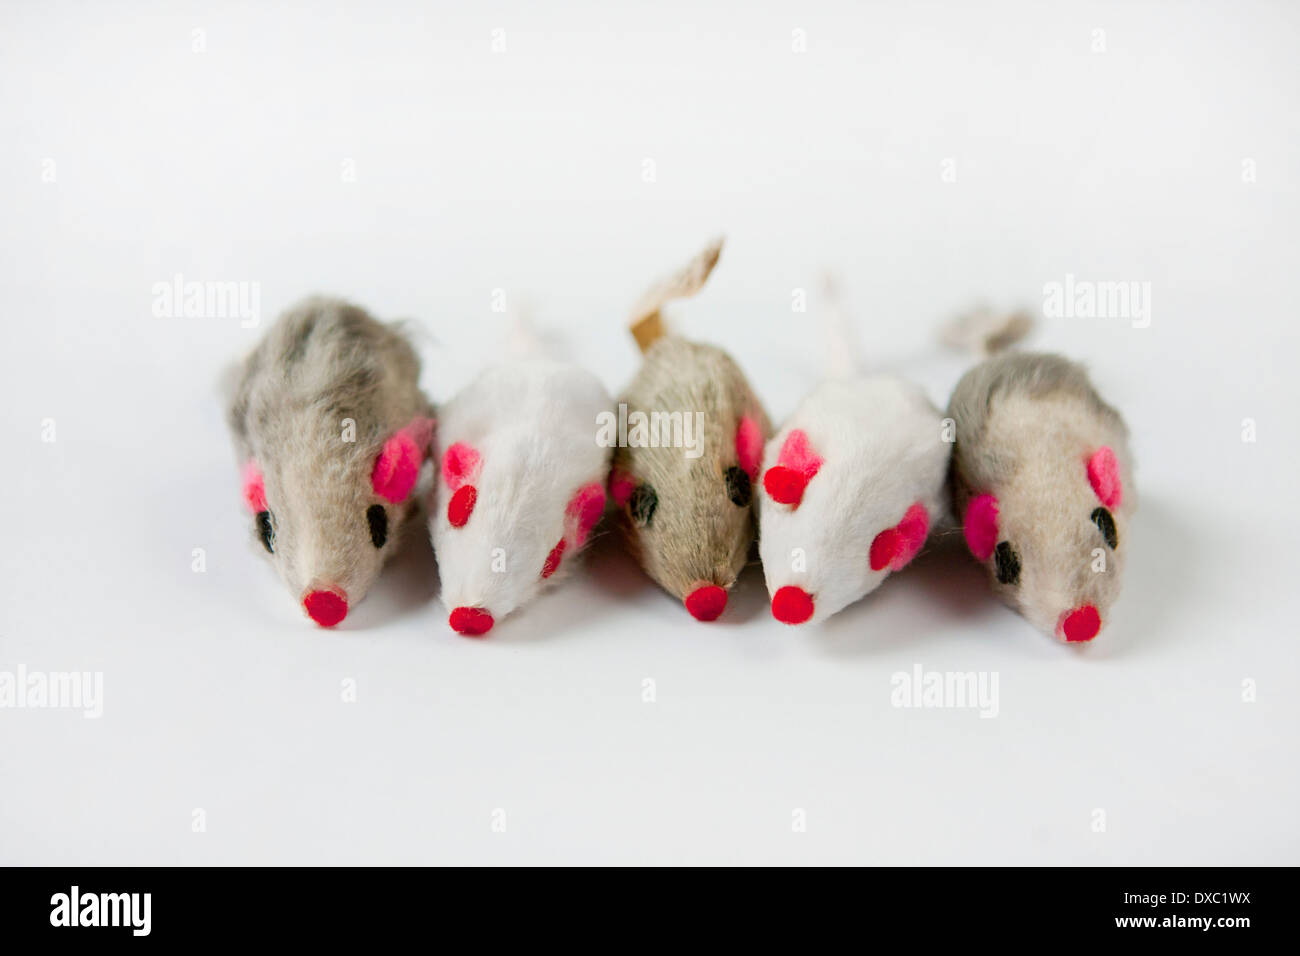 Five realistic, catnip mice cat toys aligned in a row, pattern of white and gray. Stock Photo